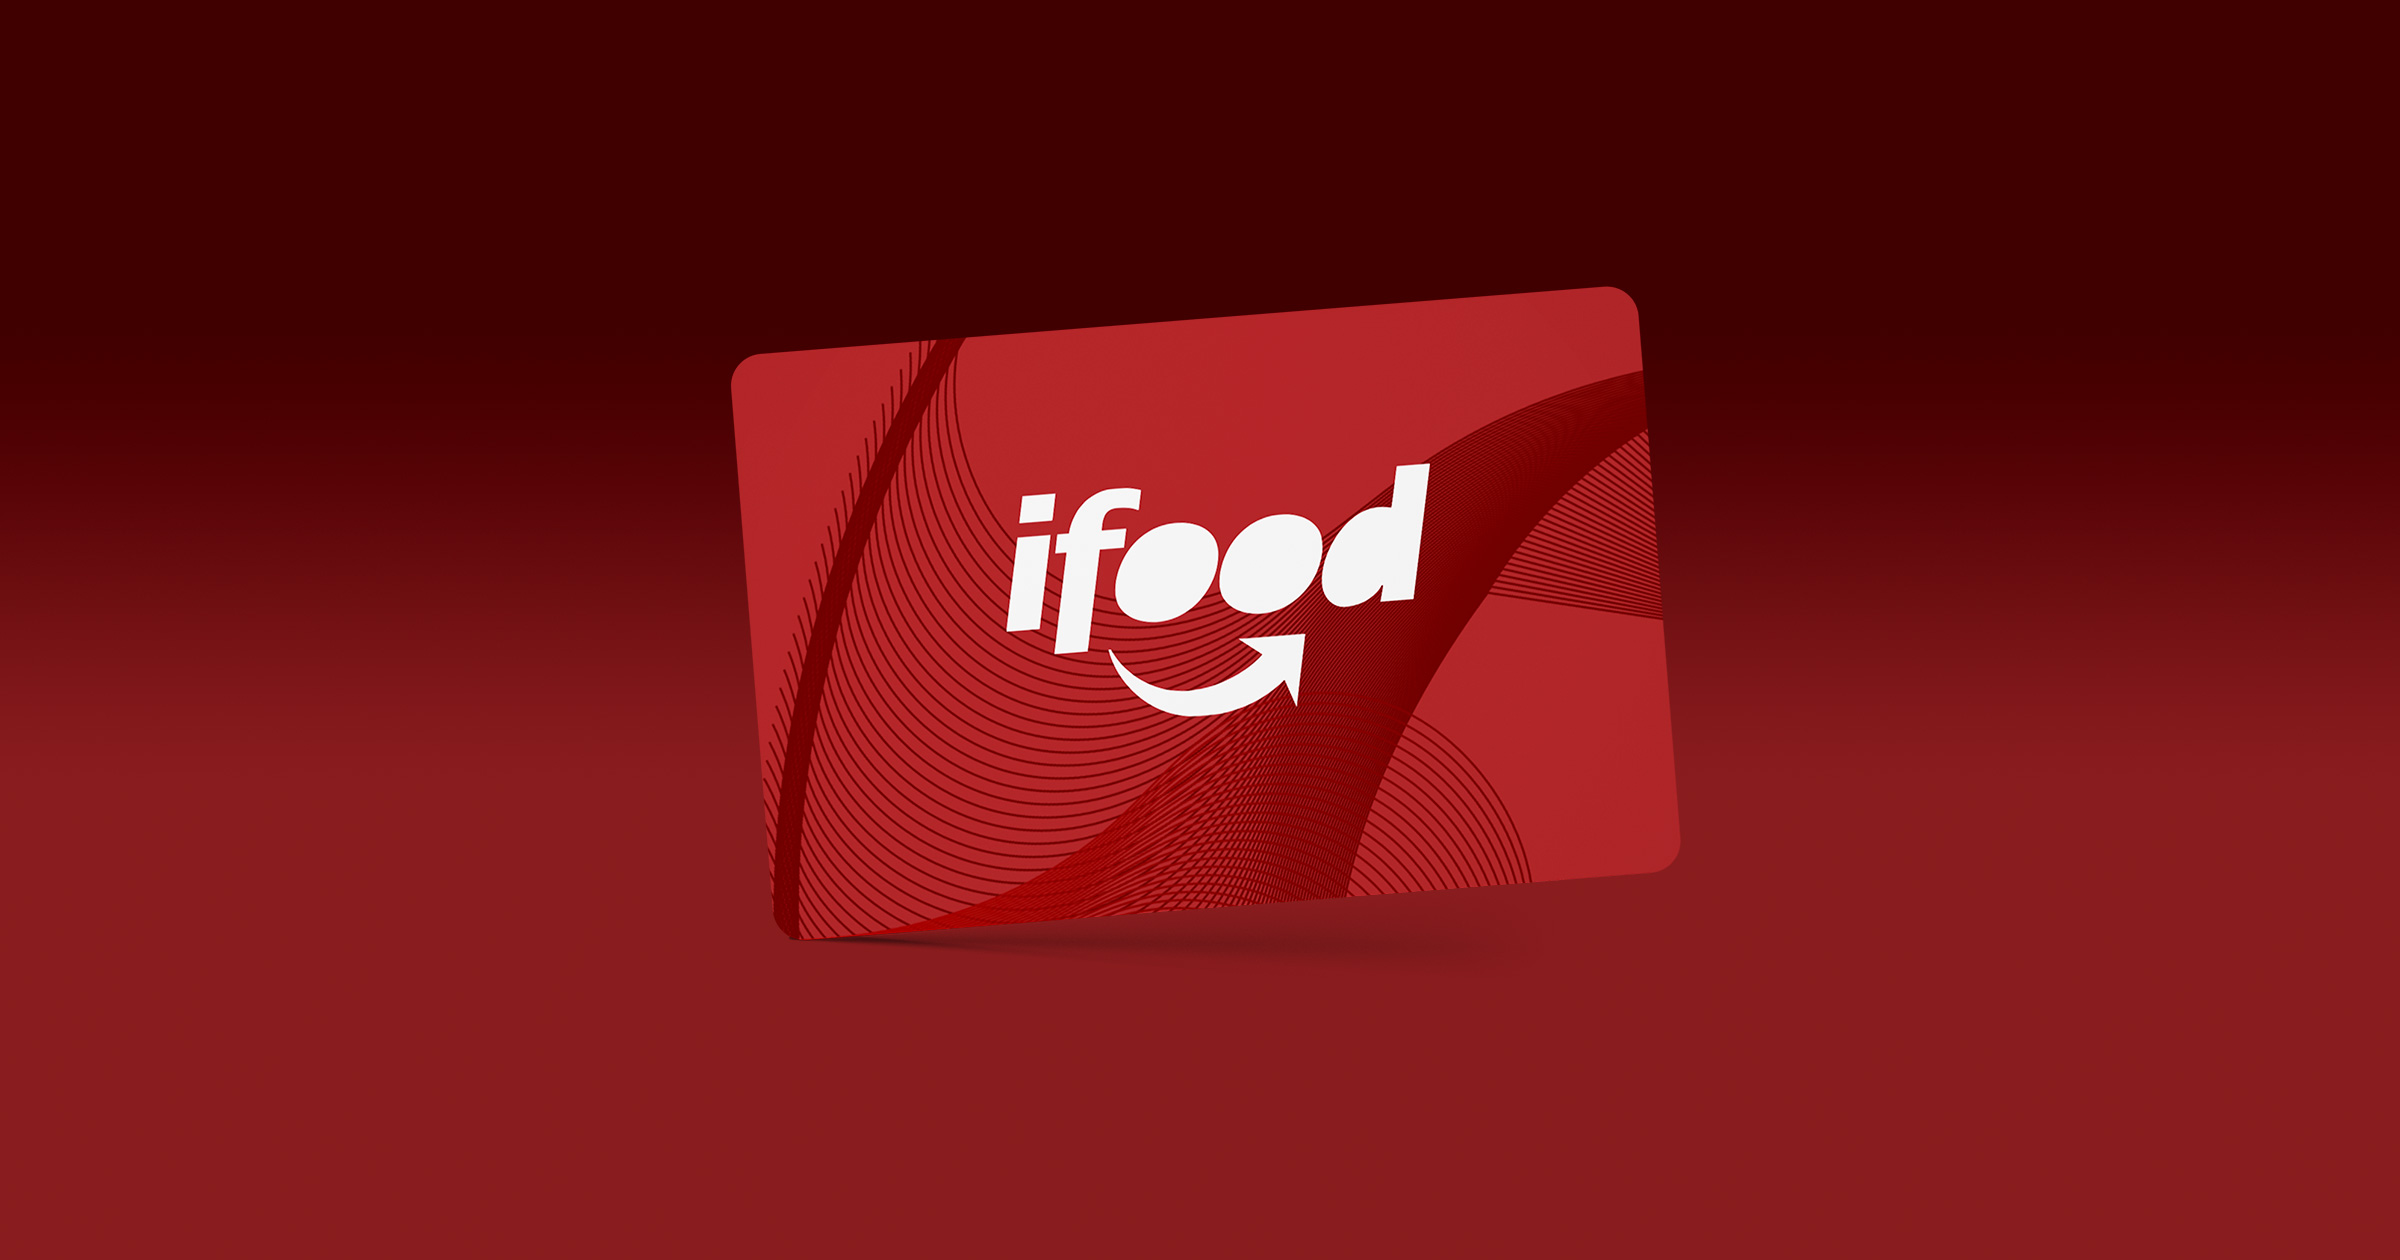 IFood BRL 50 Gift Card BR